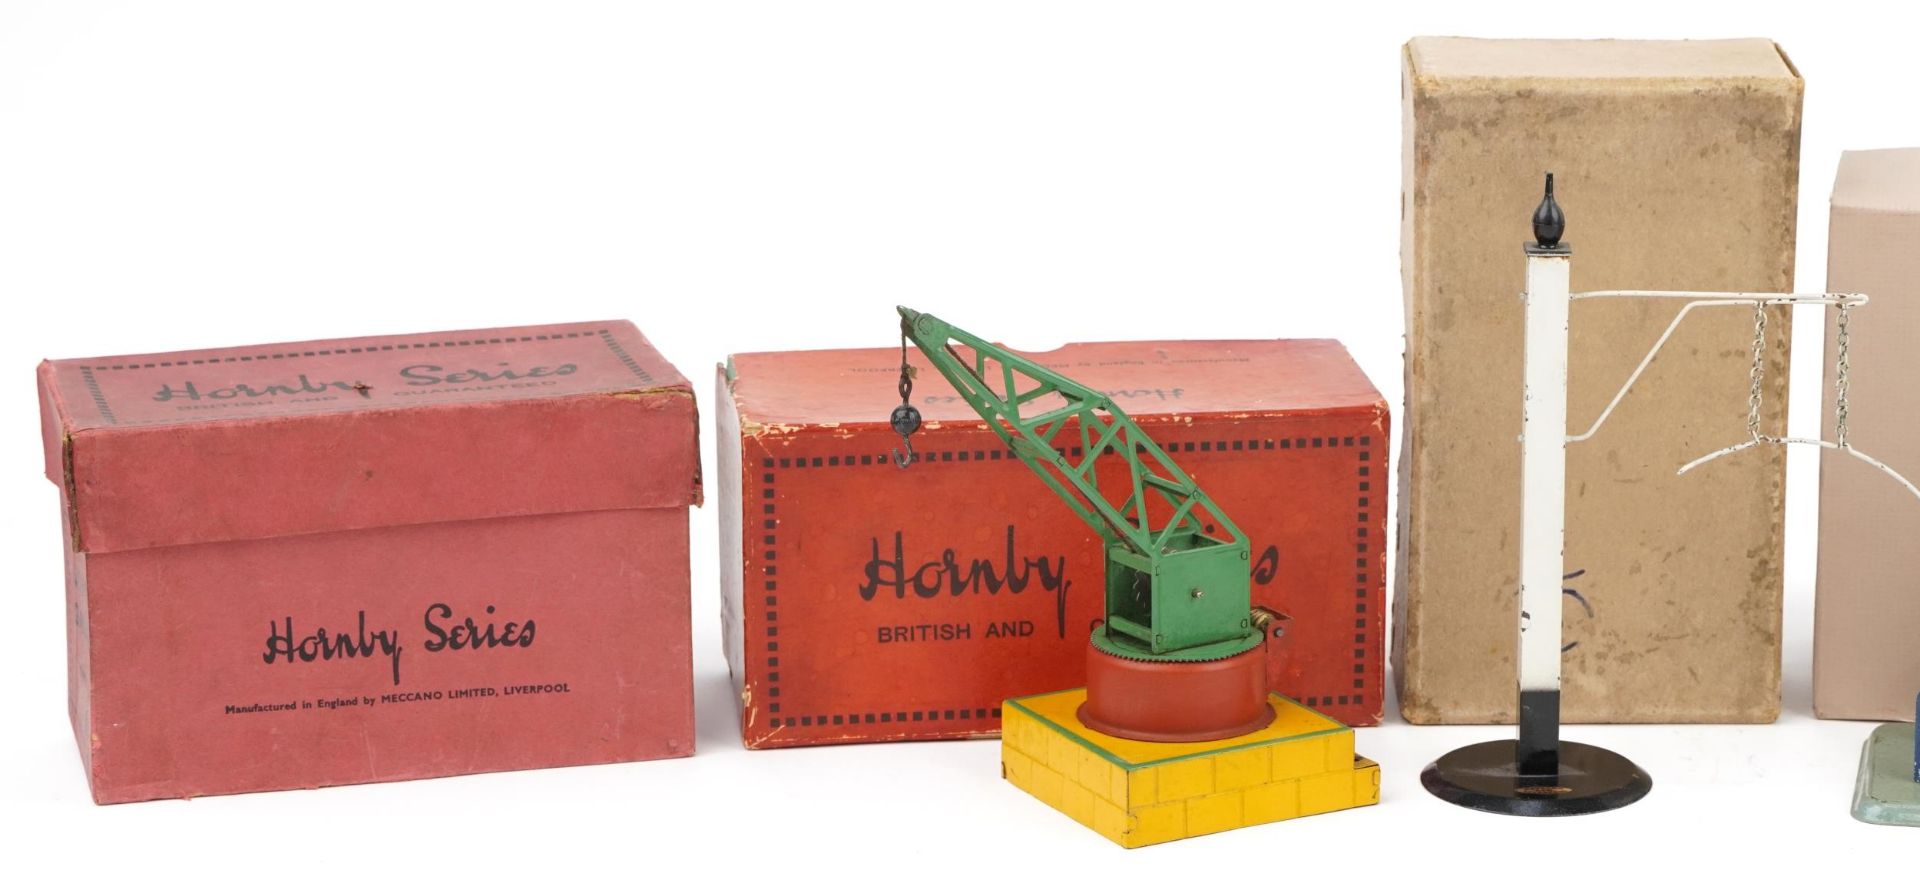 Five Hornby O gauge tinplate model railway signals and accessories with boxes including two platform - Image 2 of 3